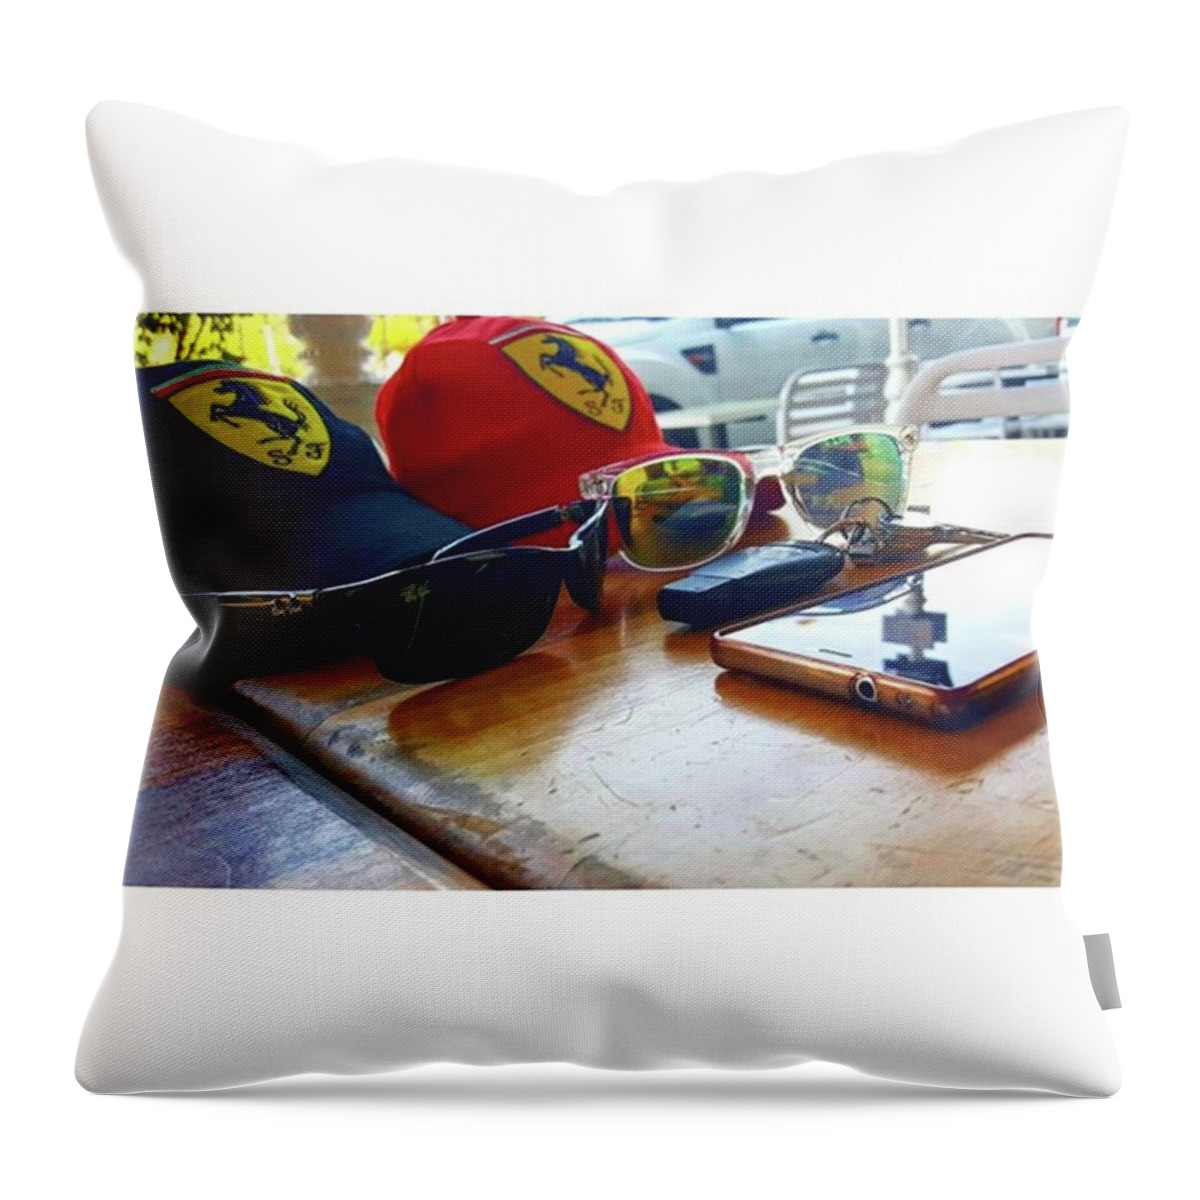 Healthyfood Throw Pillow featuring the photograph Post 5km Parkrun Reward by CaESaR ZN